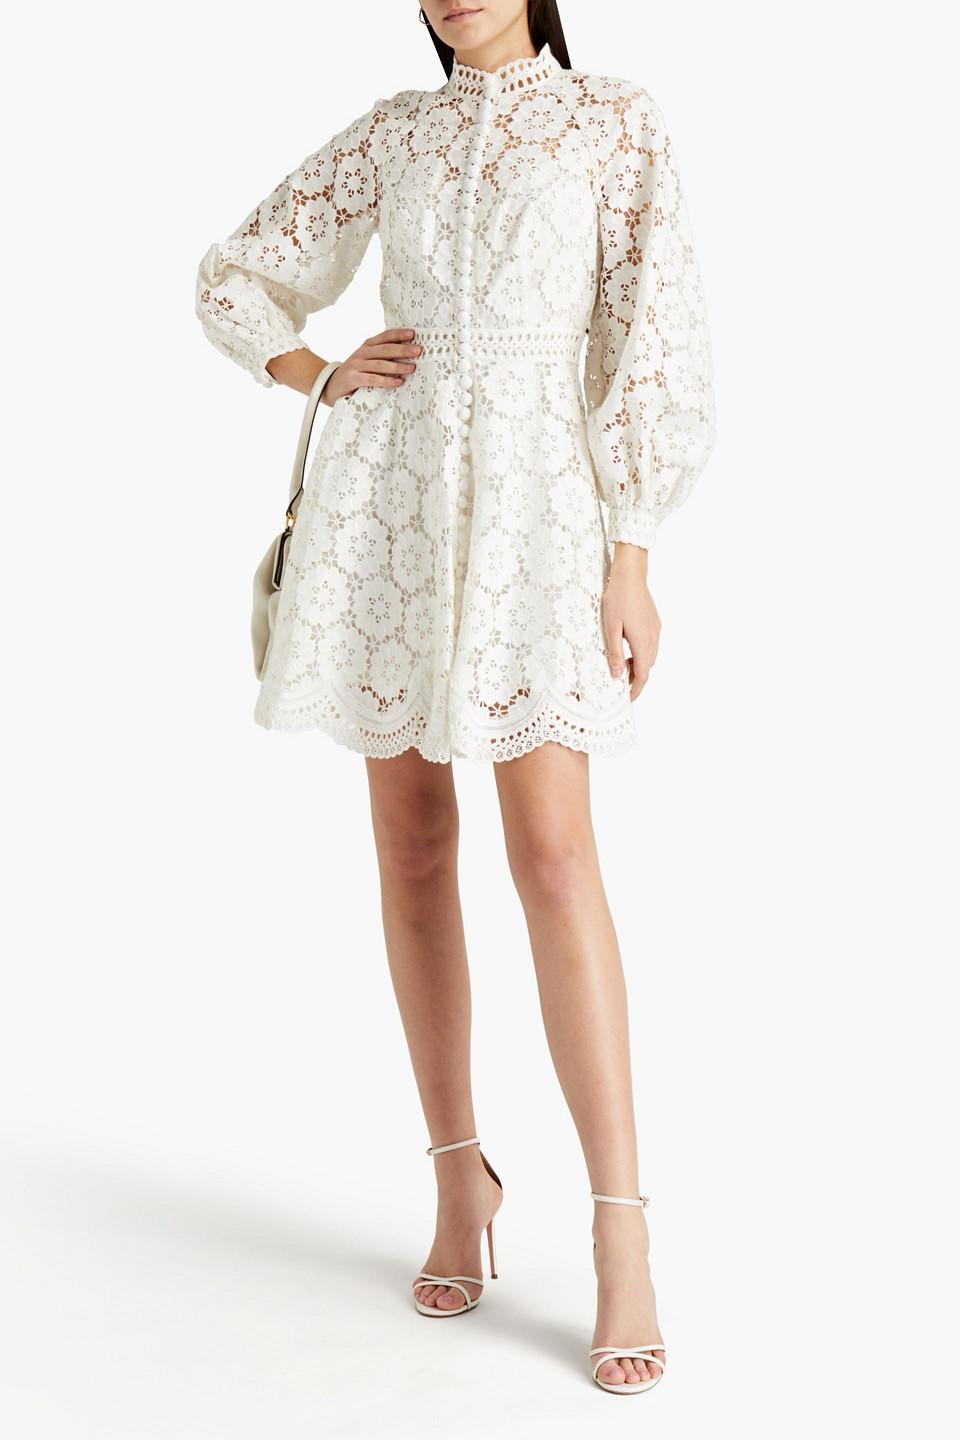 Zimmermann Linen And Cotton-blend Guipure Lace Mini Dress in White | Lyst